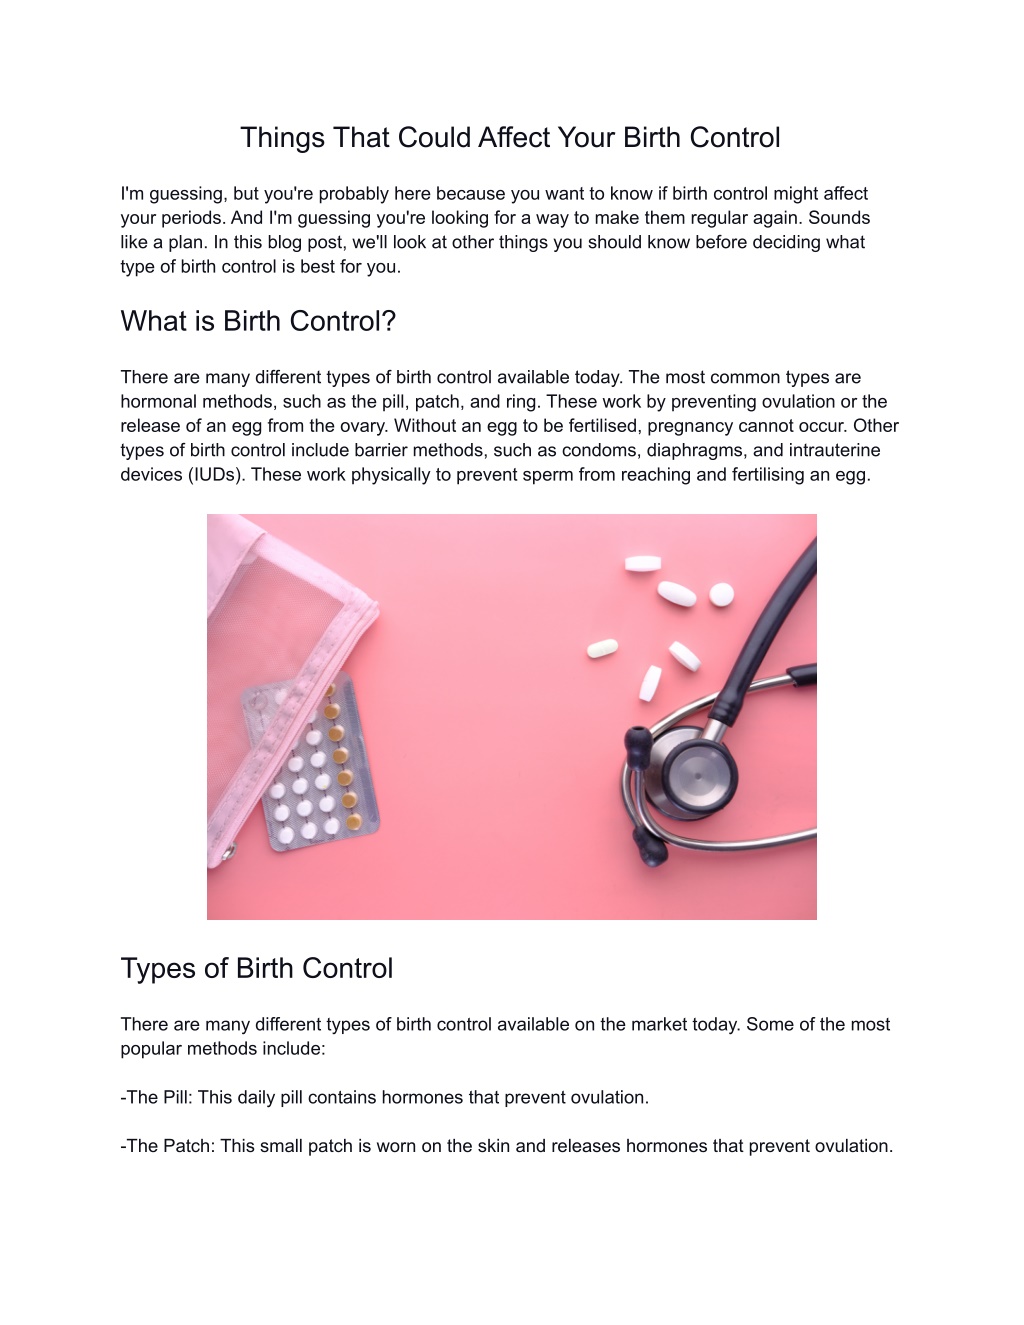 Ppt Things That Could Affect Your Birth Control Powerpoint Presentation Id11670044 